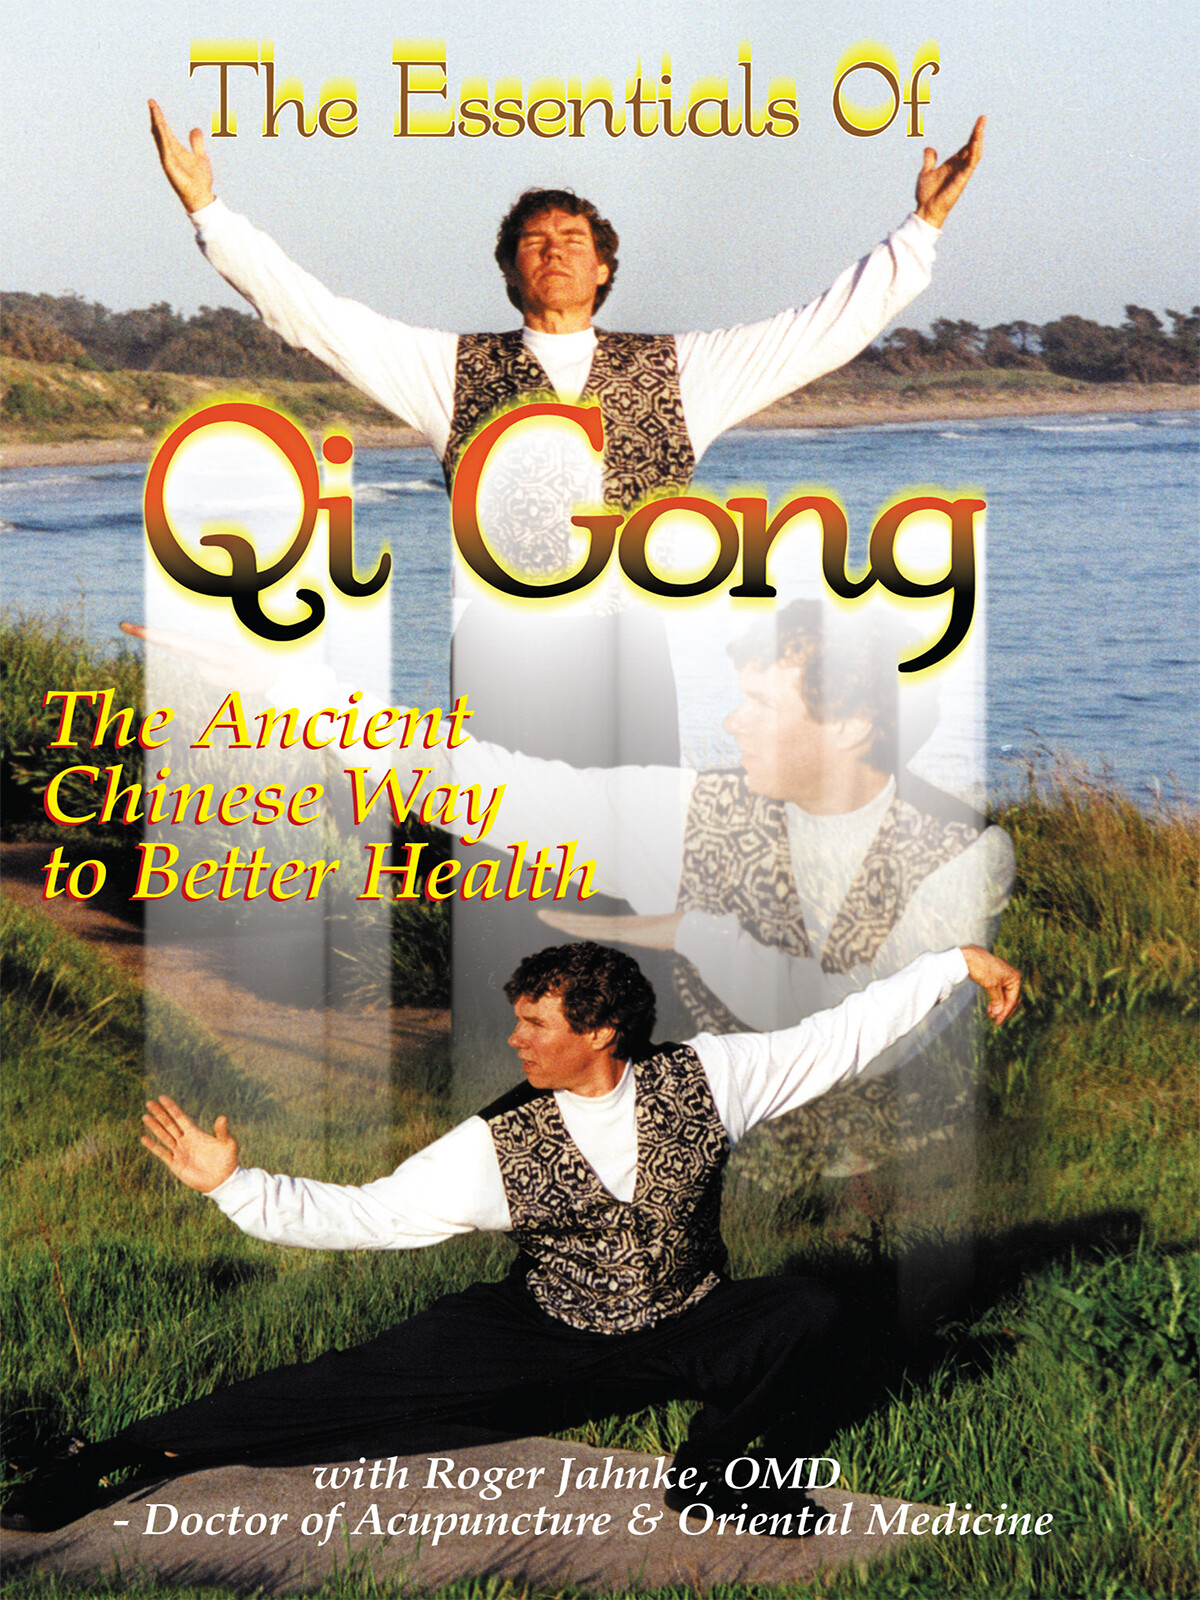 C95 - The Essentials Of Qi Gong